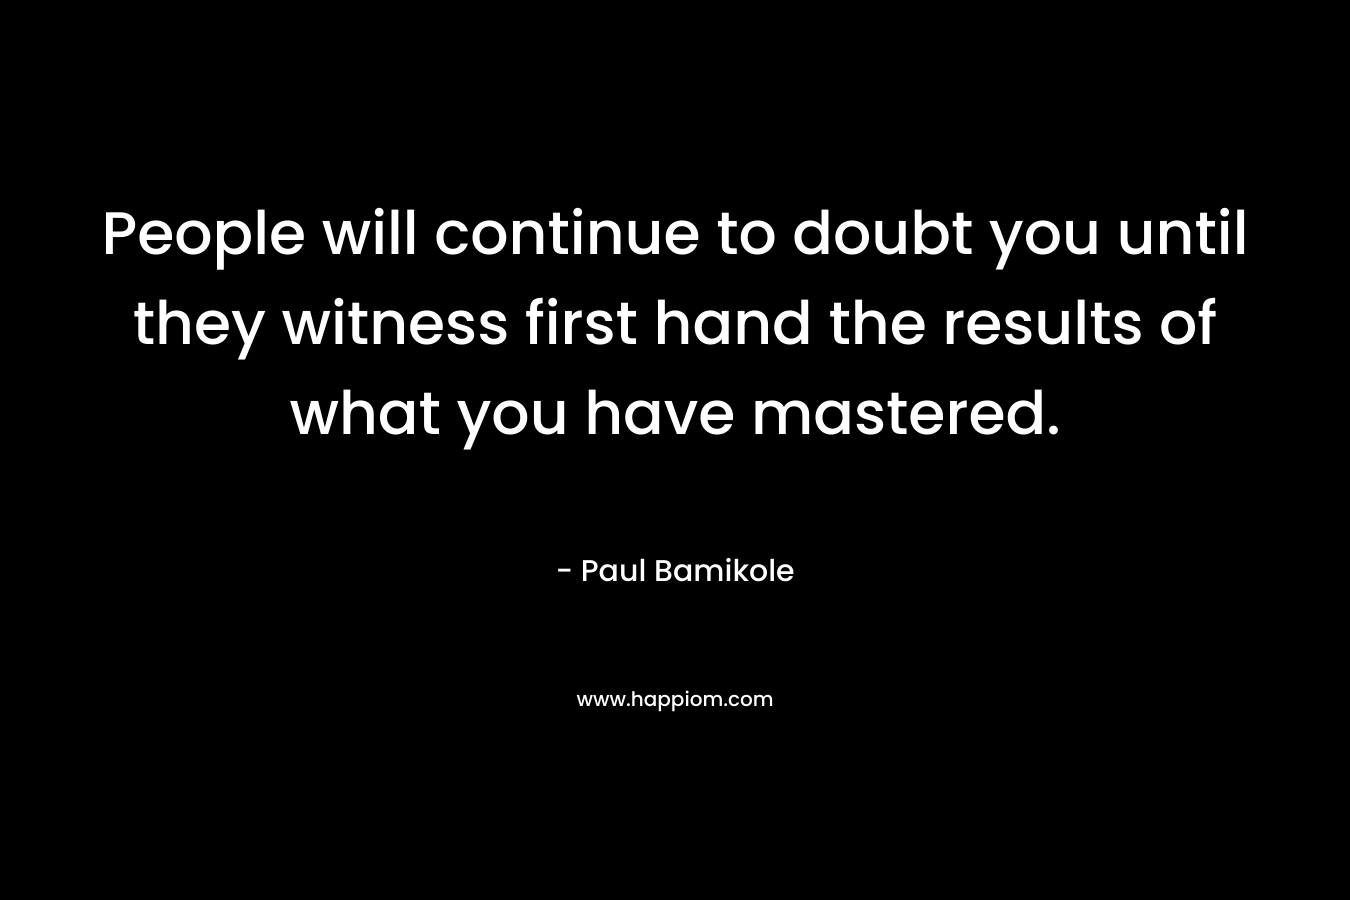 People will continue to doubt you until they witness first hand the results of what you have mastered. – Paul Bamikole